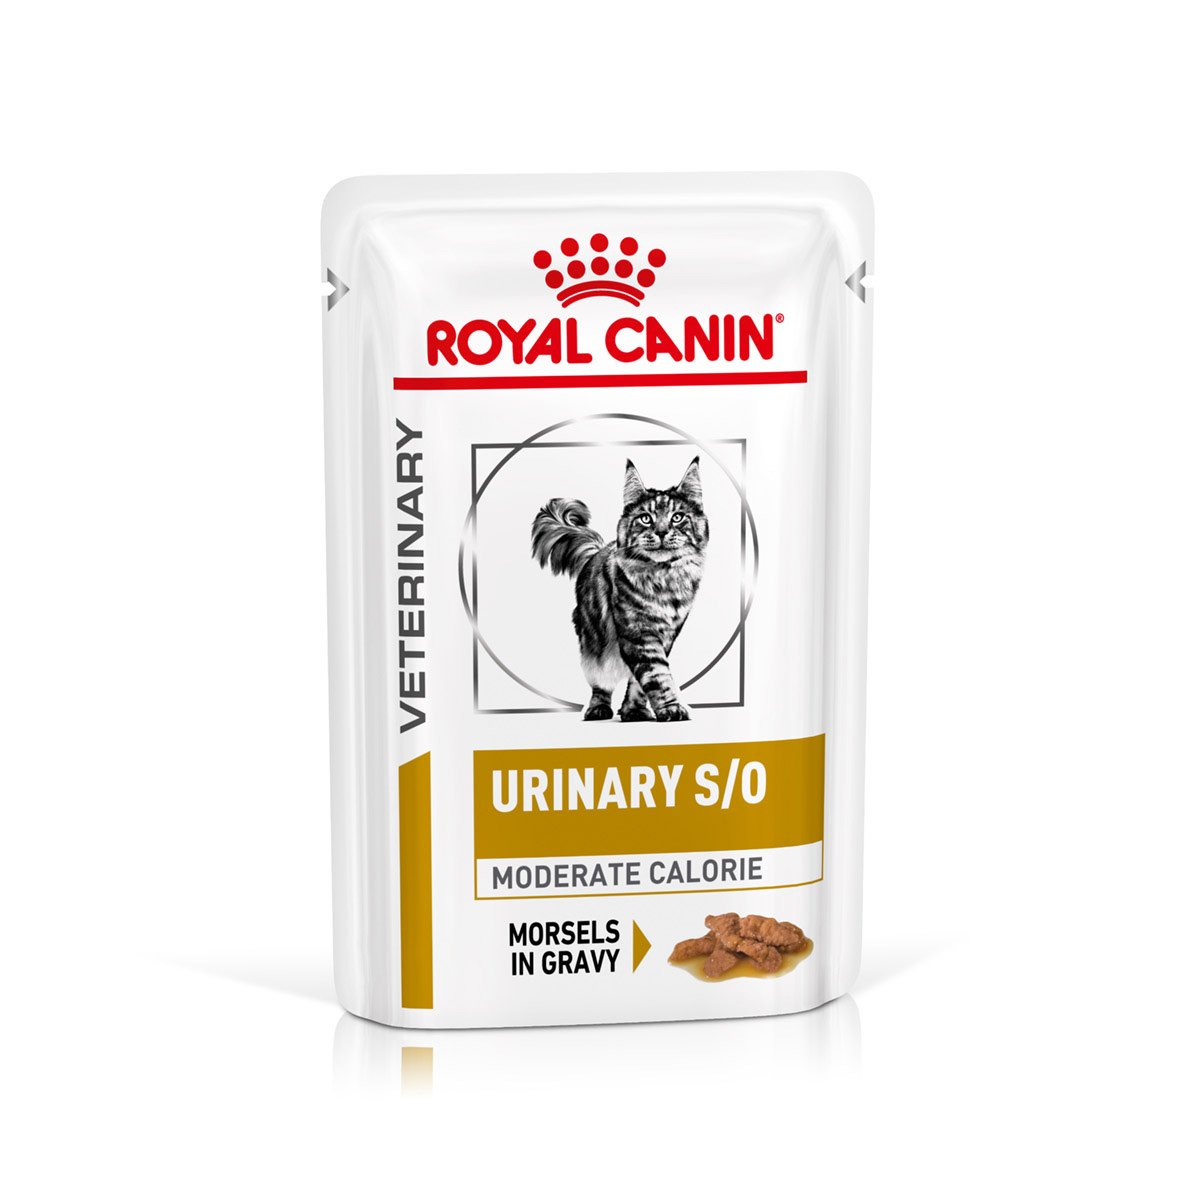 ROYAL CANIN® URINARY S/O MODERATE CALORIE Häppchen in Soße 12x85g von Royal Canin